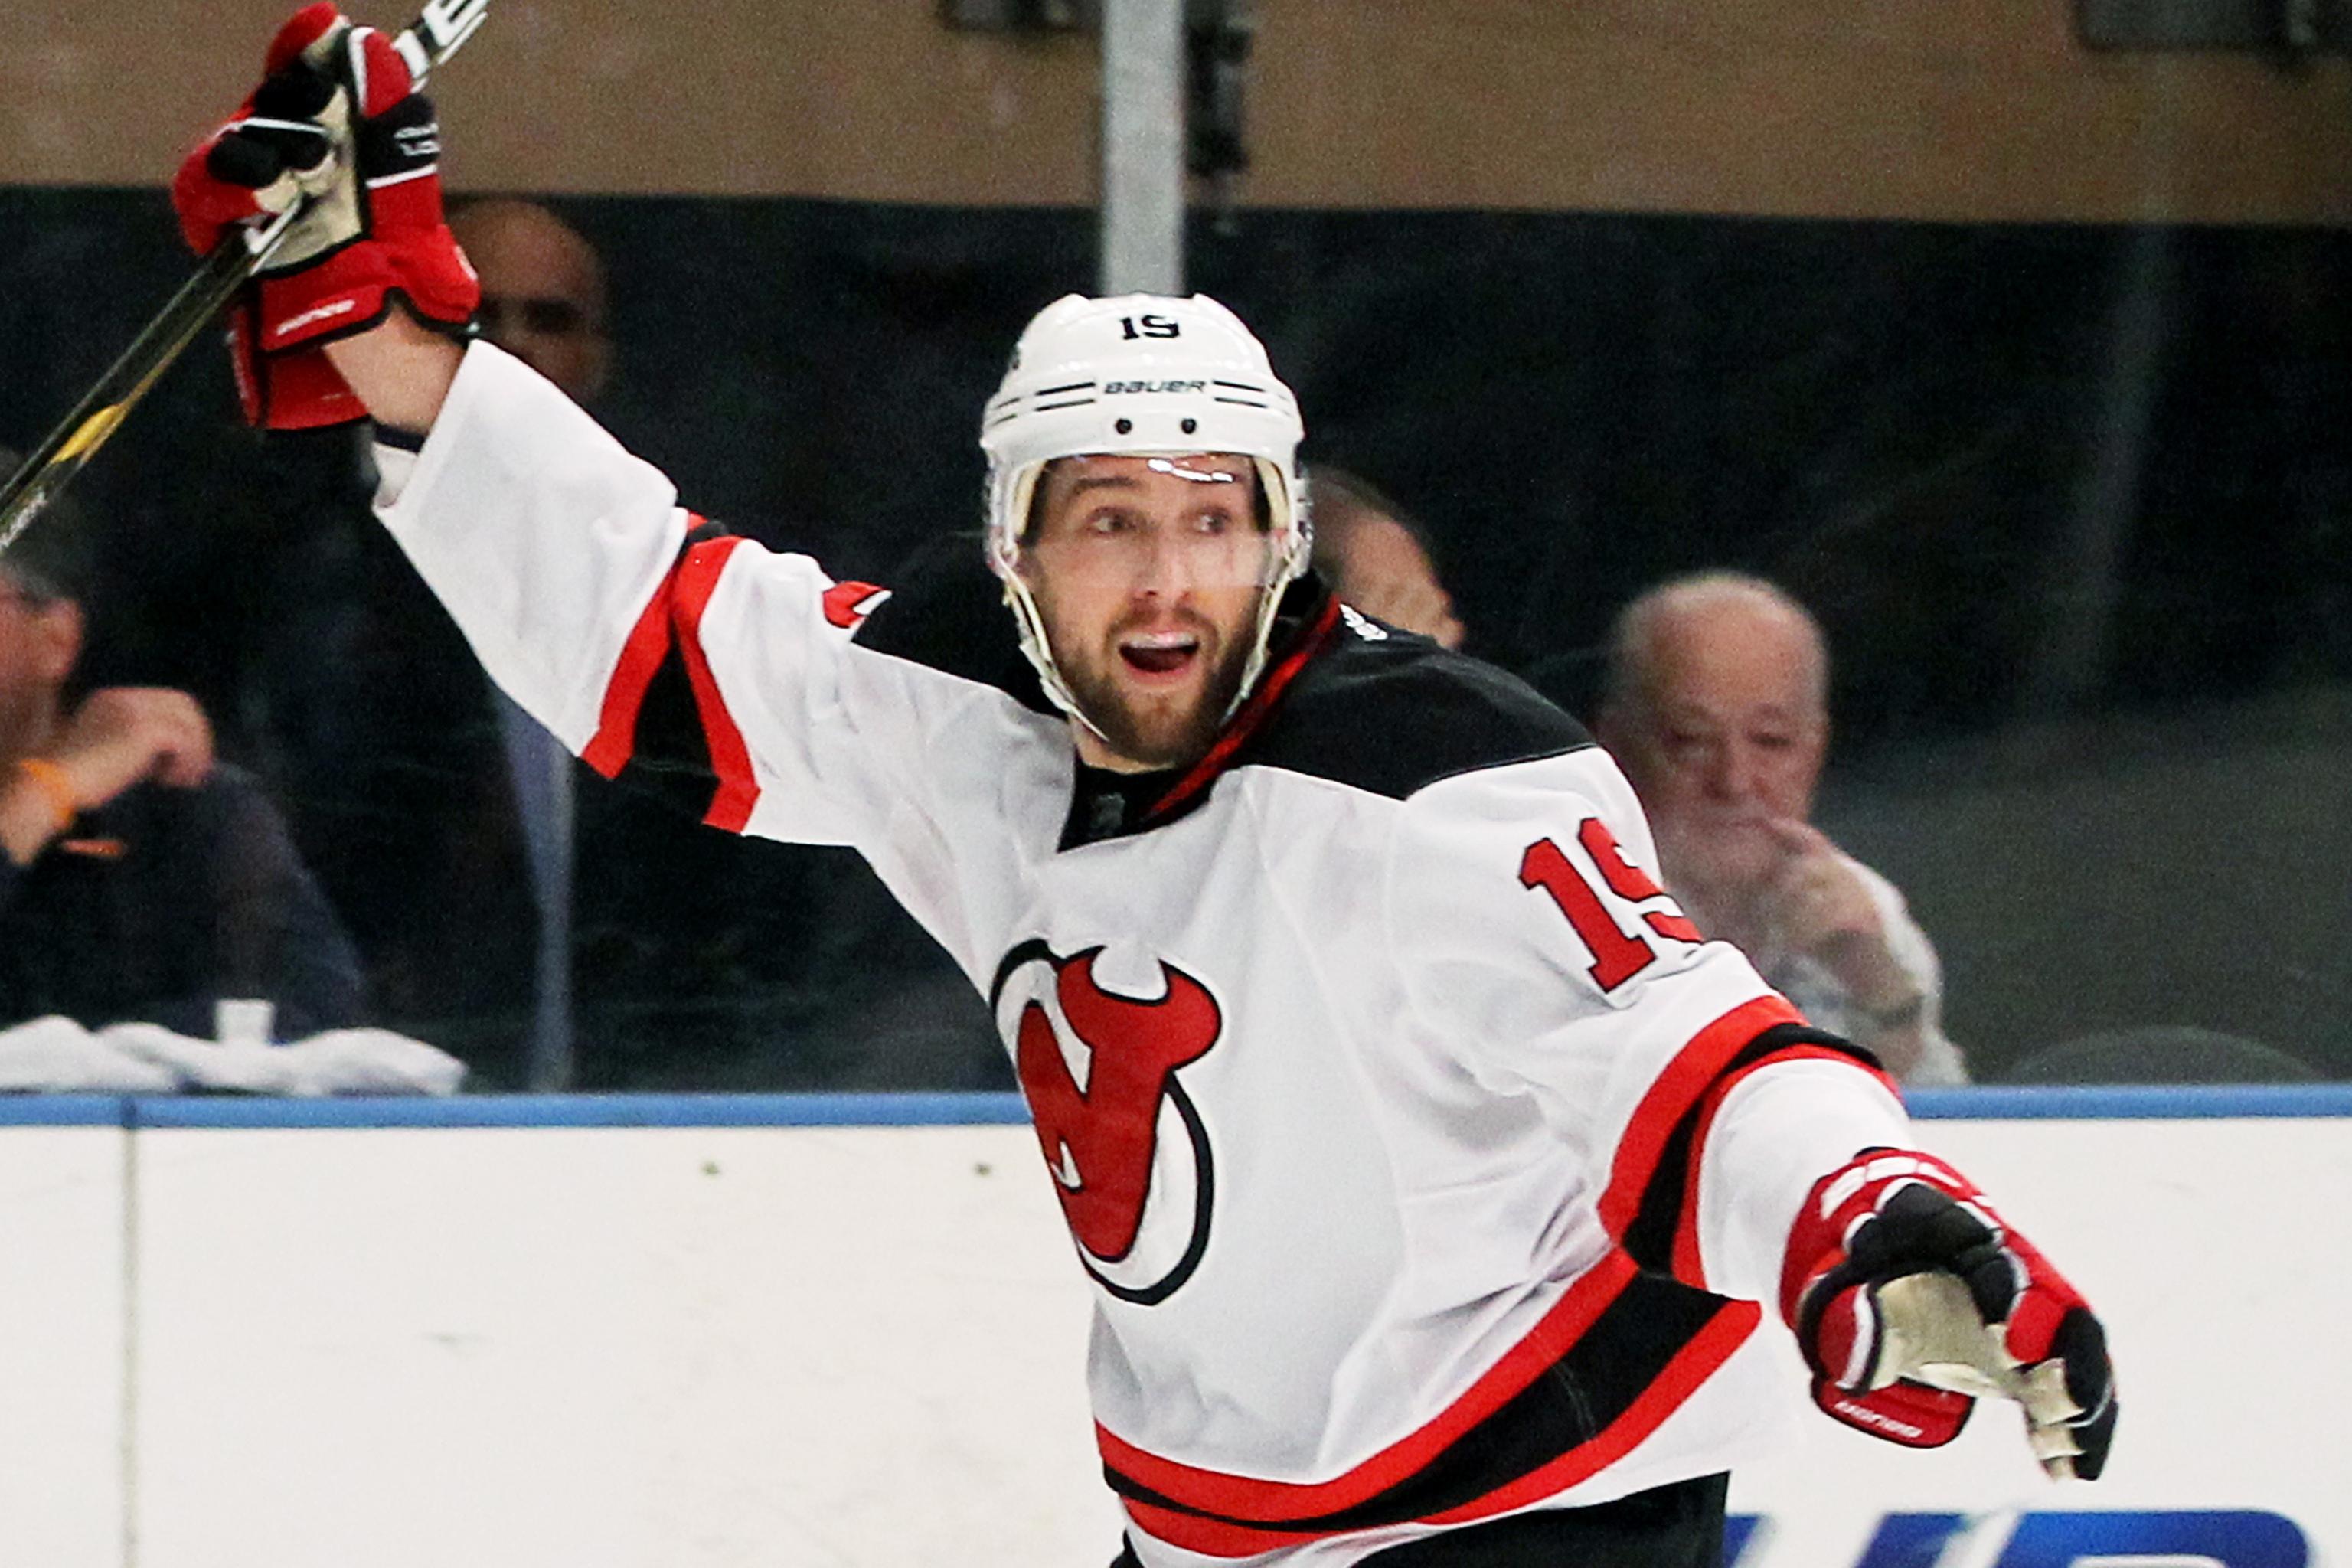 Travis Zajac: A New Defensive Weapon for New York - Drive4Five